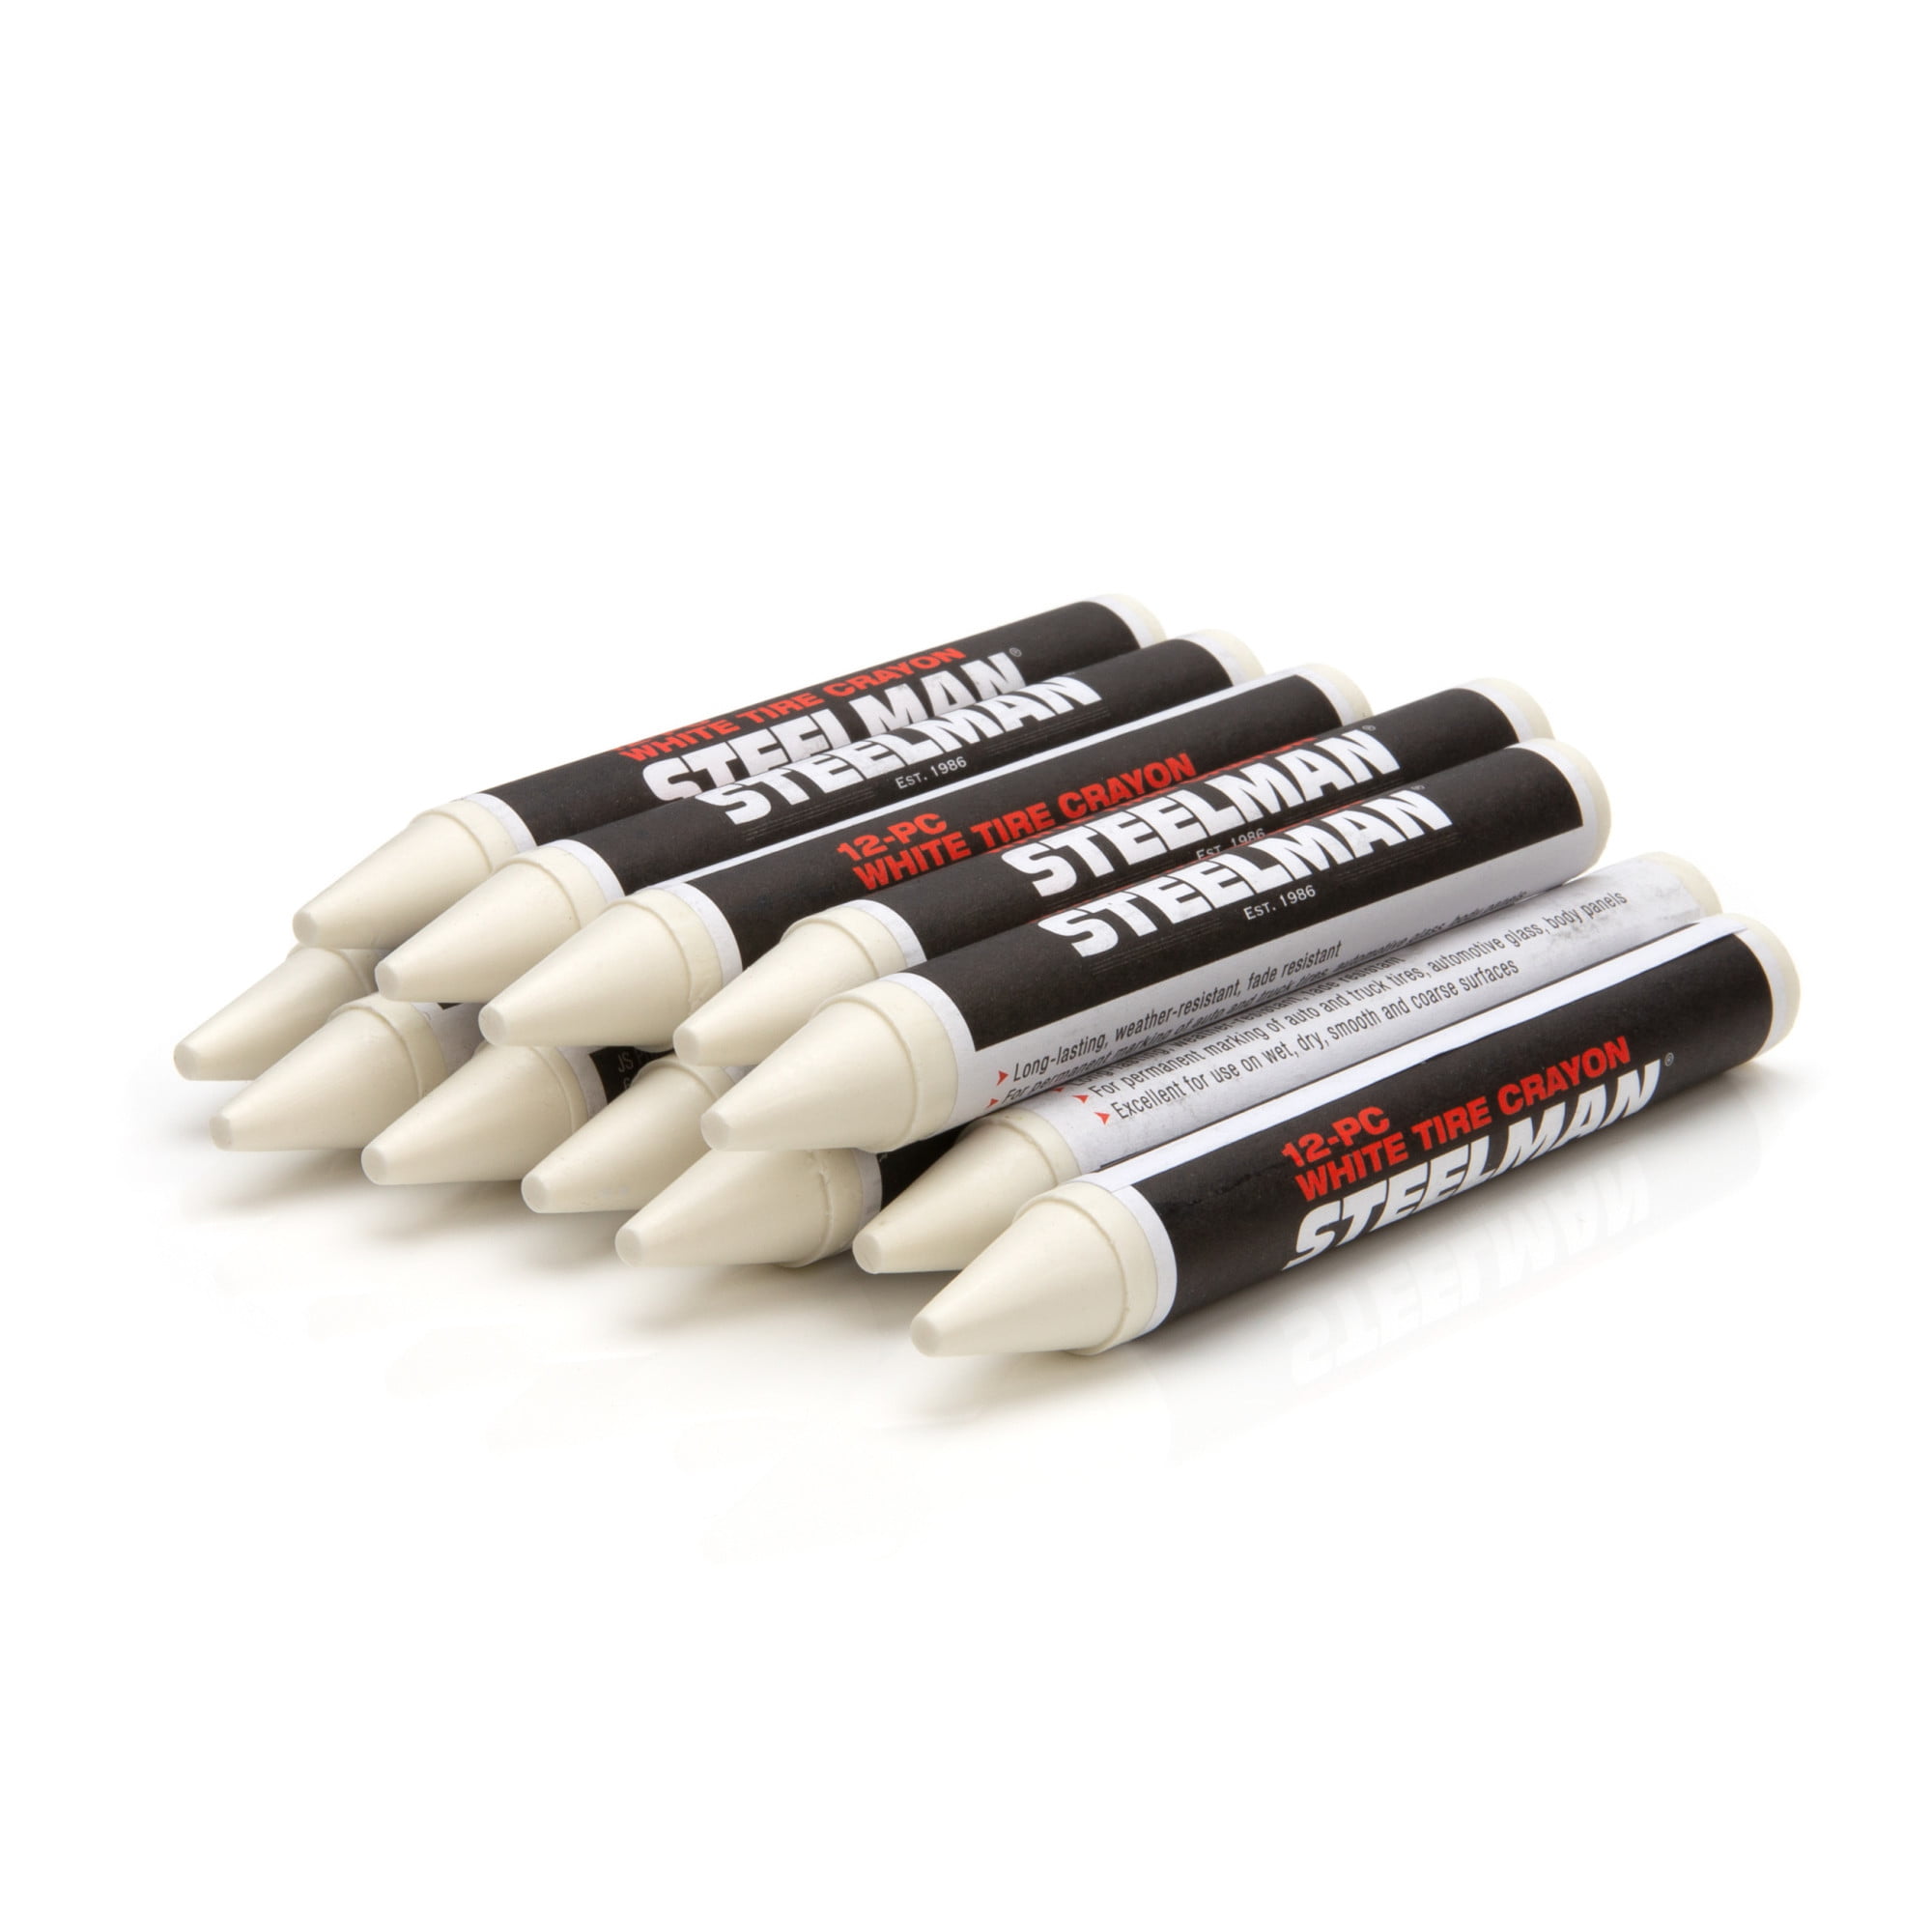 12 Pack White Tire Marking Crayons Rubber Marker Chalk New Free Shipping USA